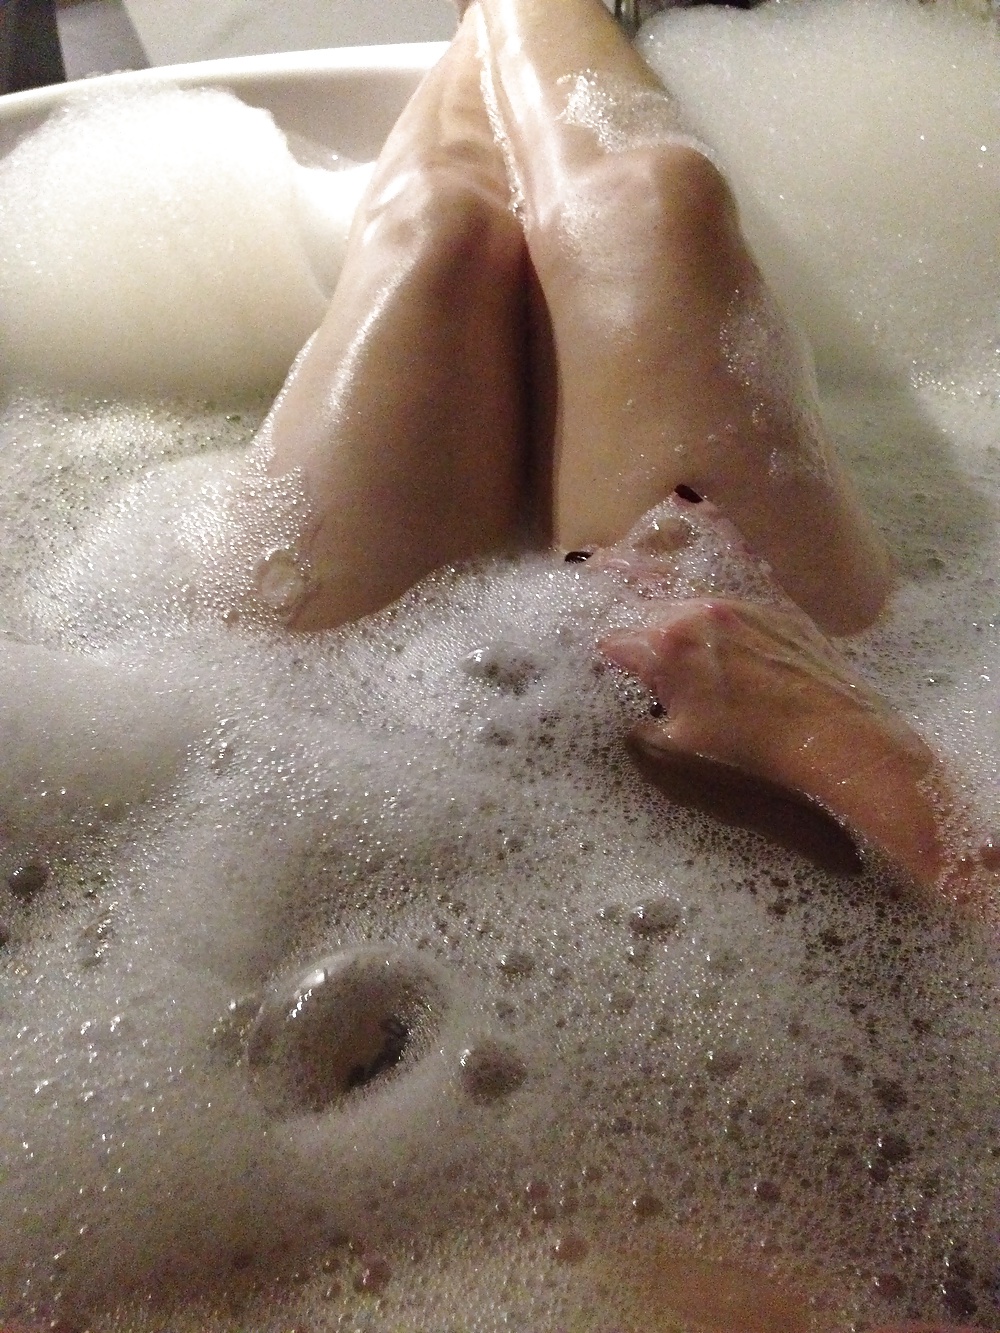 Sexy bubble bath time bathing my tits, pussy and legs  #31006802